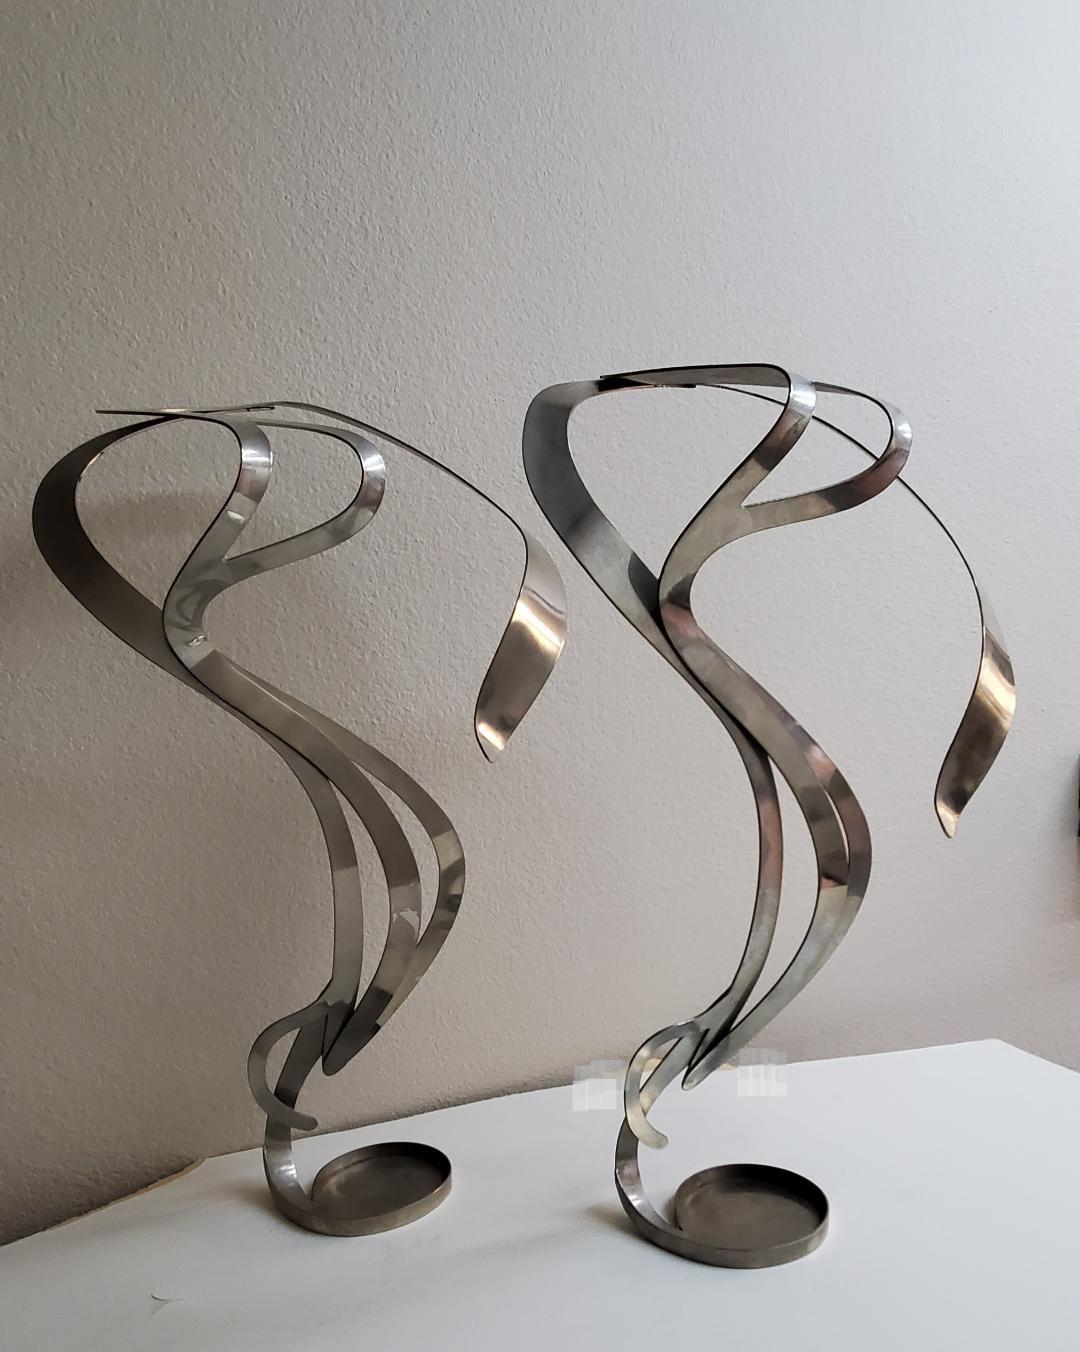 2 Art Nouveau Styled Candle Holders Crafted Into Swirling Twirling Metal Smoke  For Sale 3